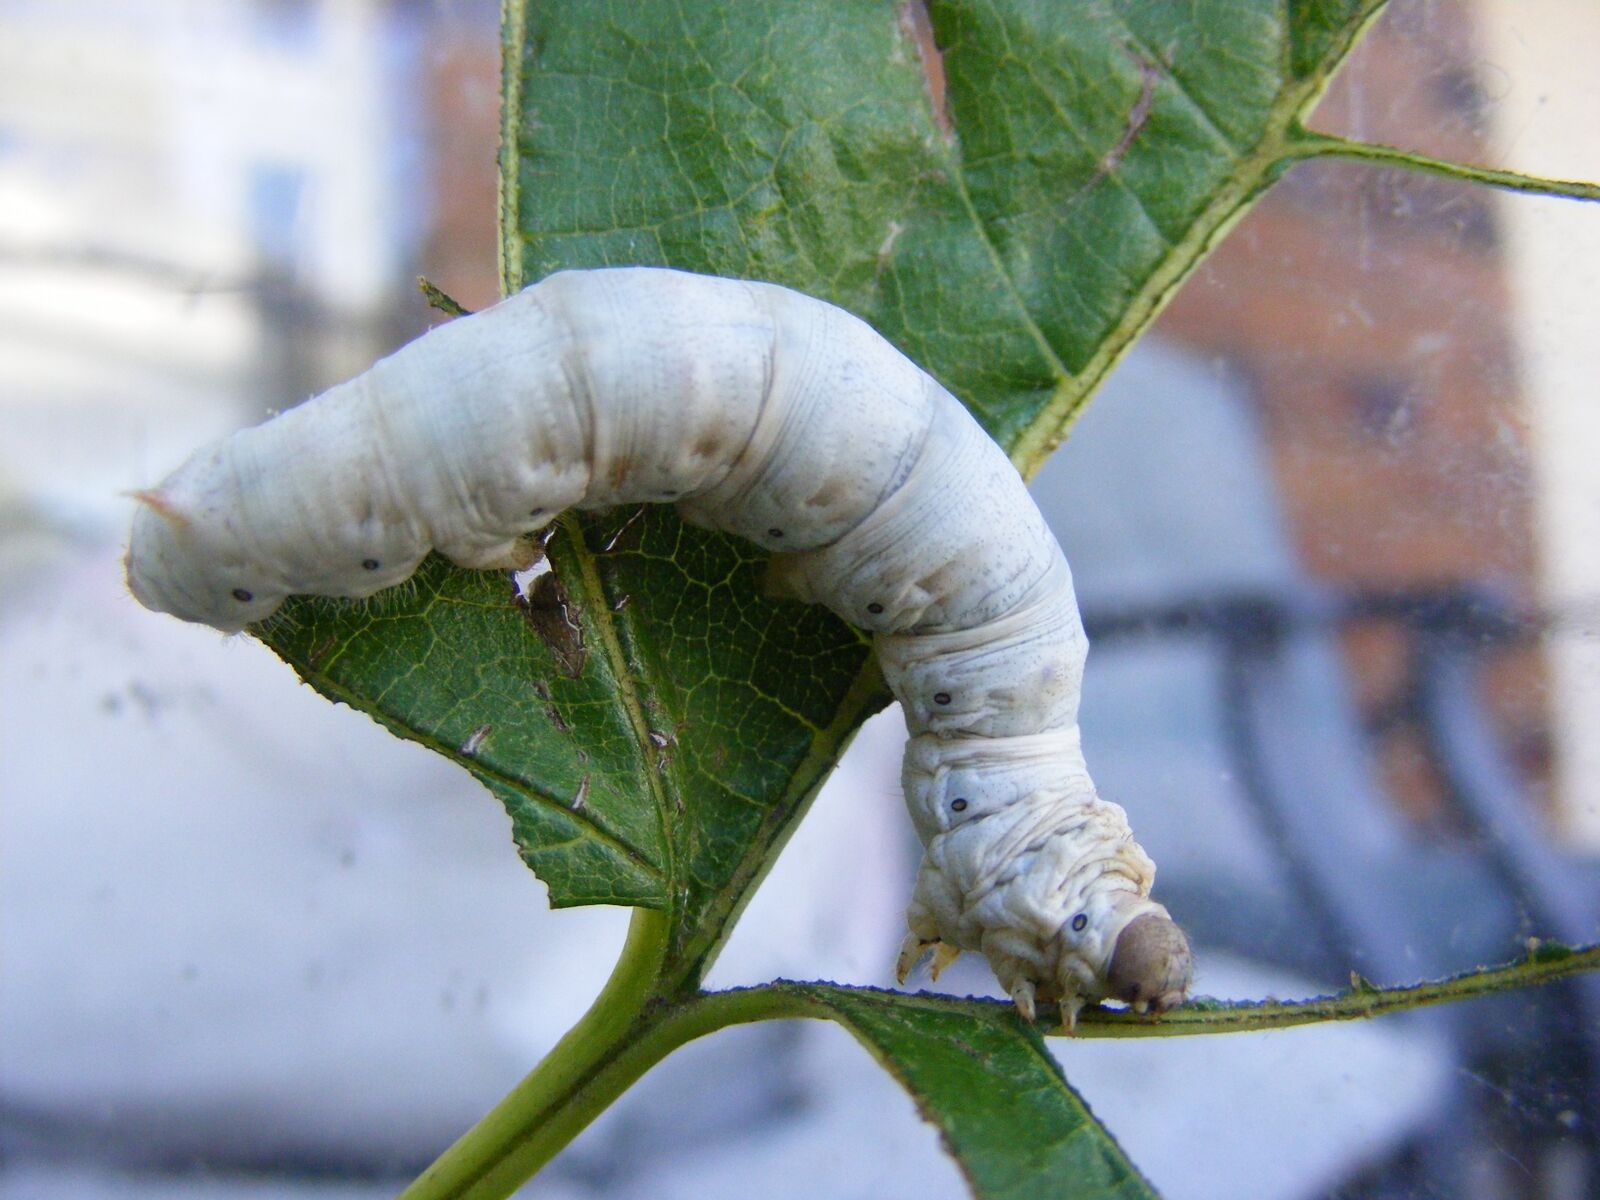 A large White Seductress Silkworm eating a Mulberry Leaf